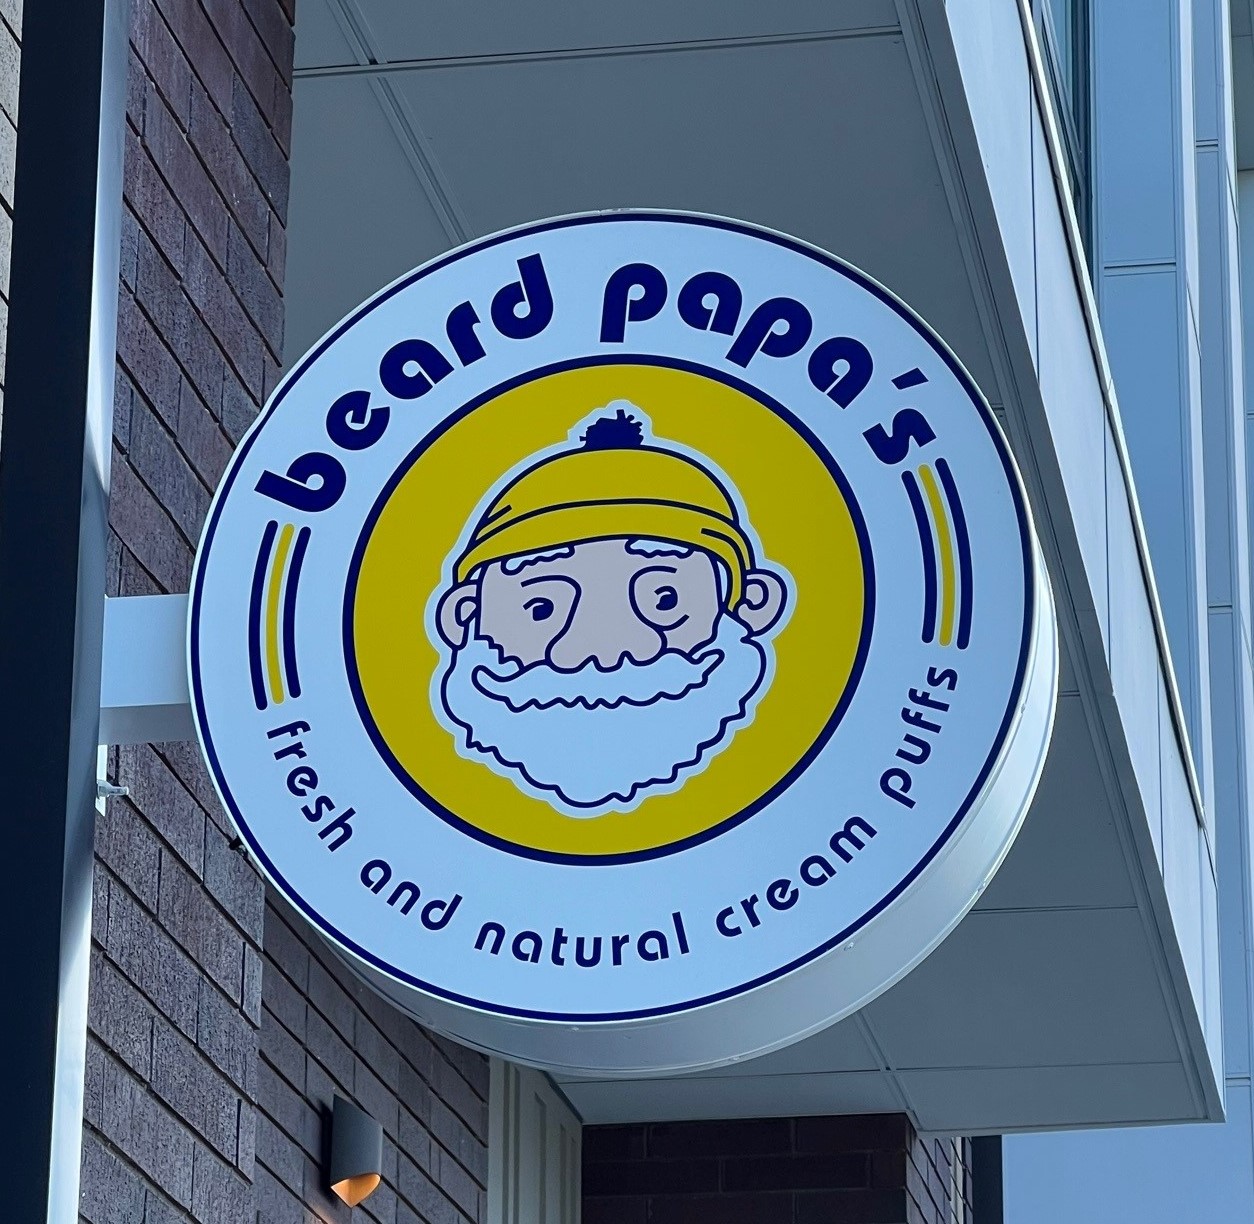 Exterior Signage for Beard Papa’s of Charlotte – JC Signs 2022